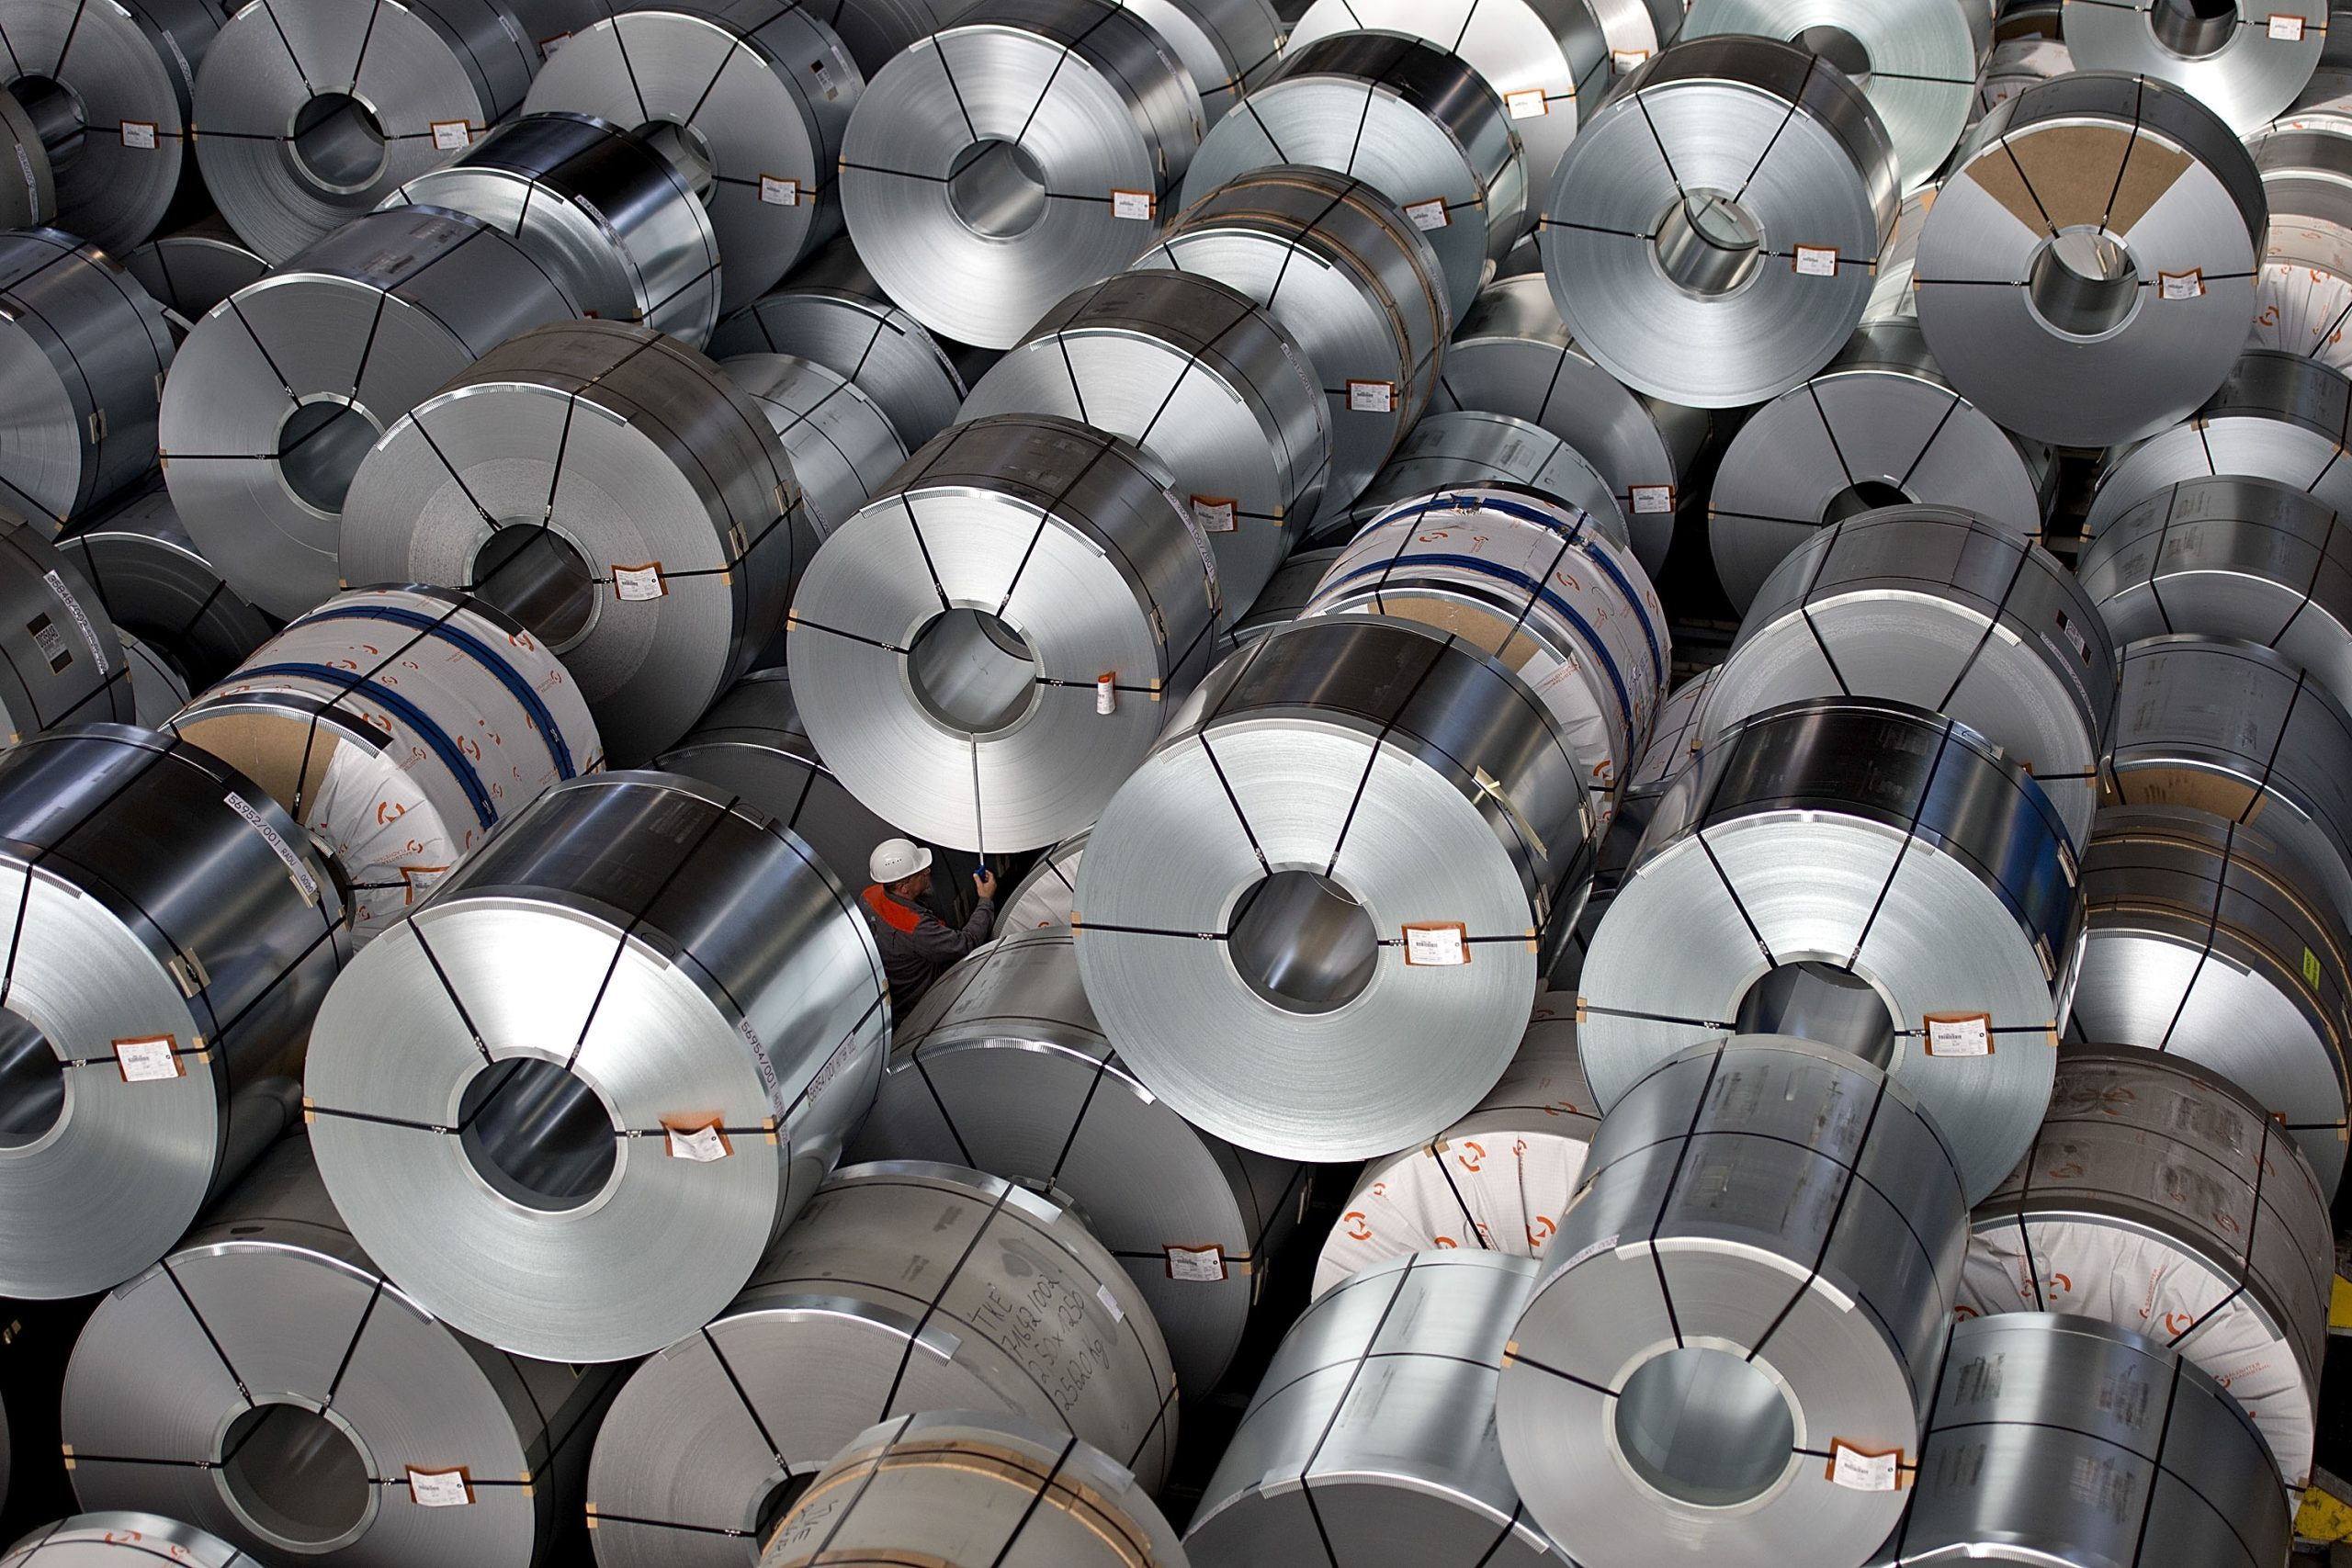 Electrical Steel Market Is Estimated To Witness High Growth Owing To Increasing Demand for Energy-Efficient Transformers